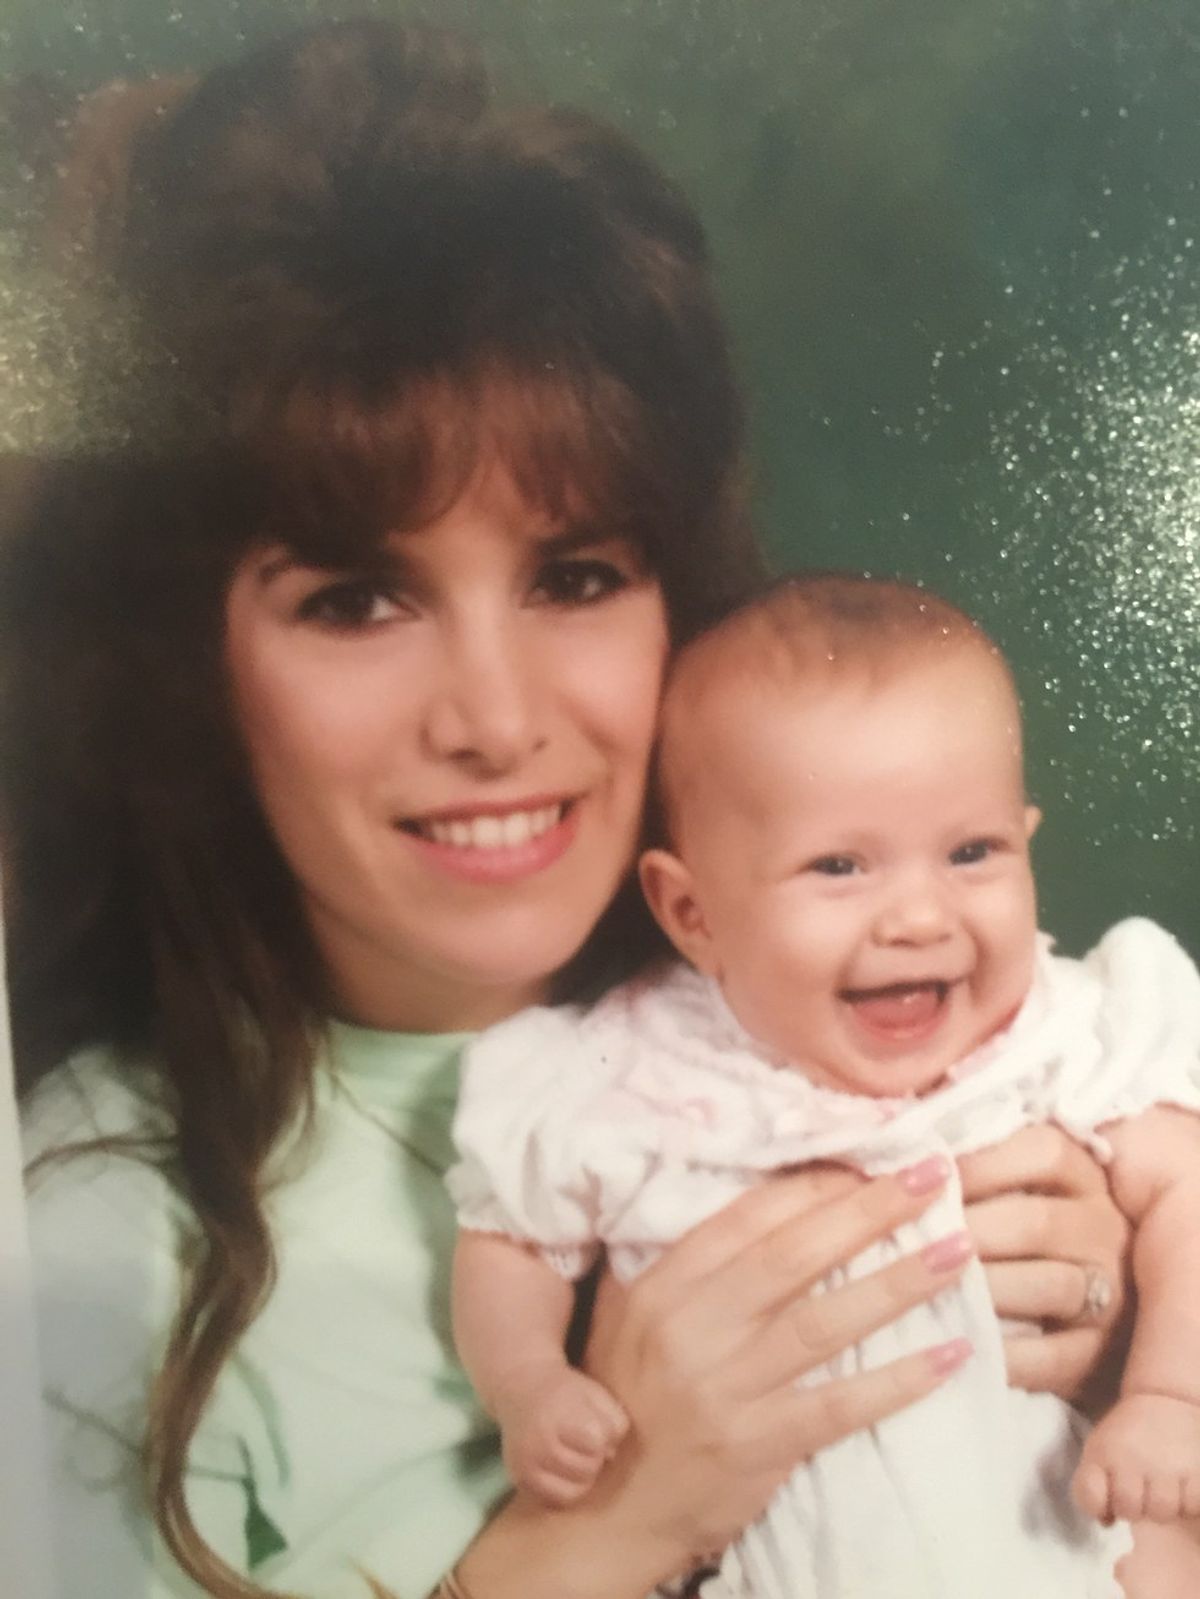 10 Things I Learned From Being Raised By A Strong Mother